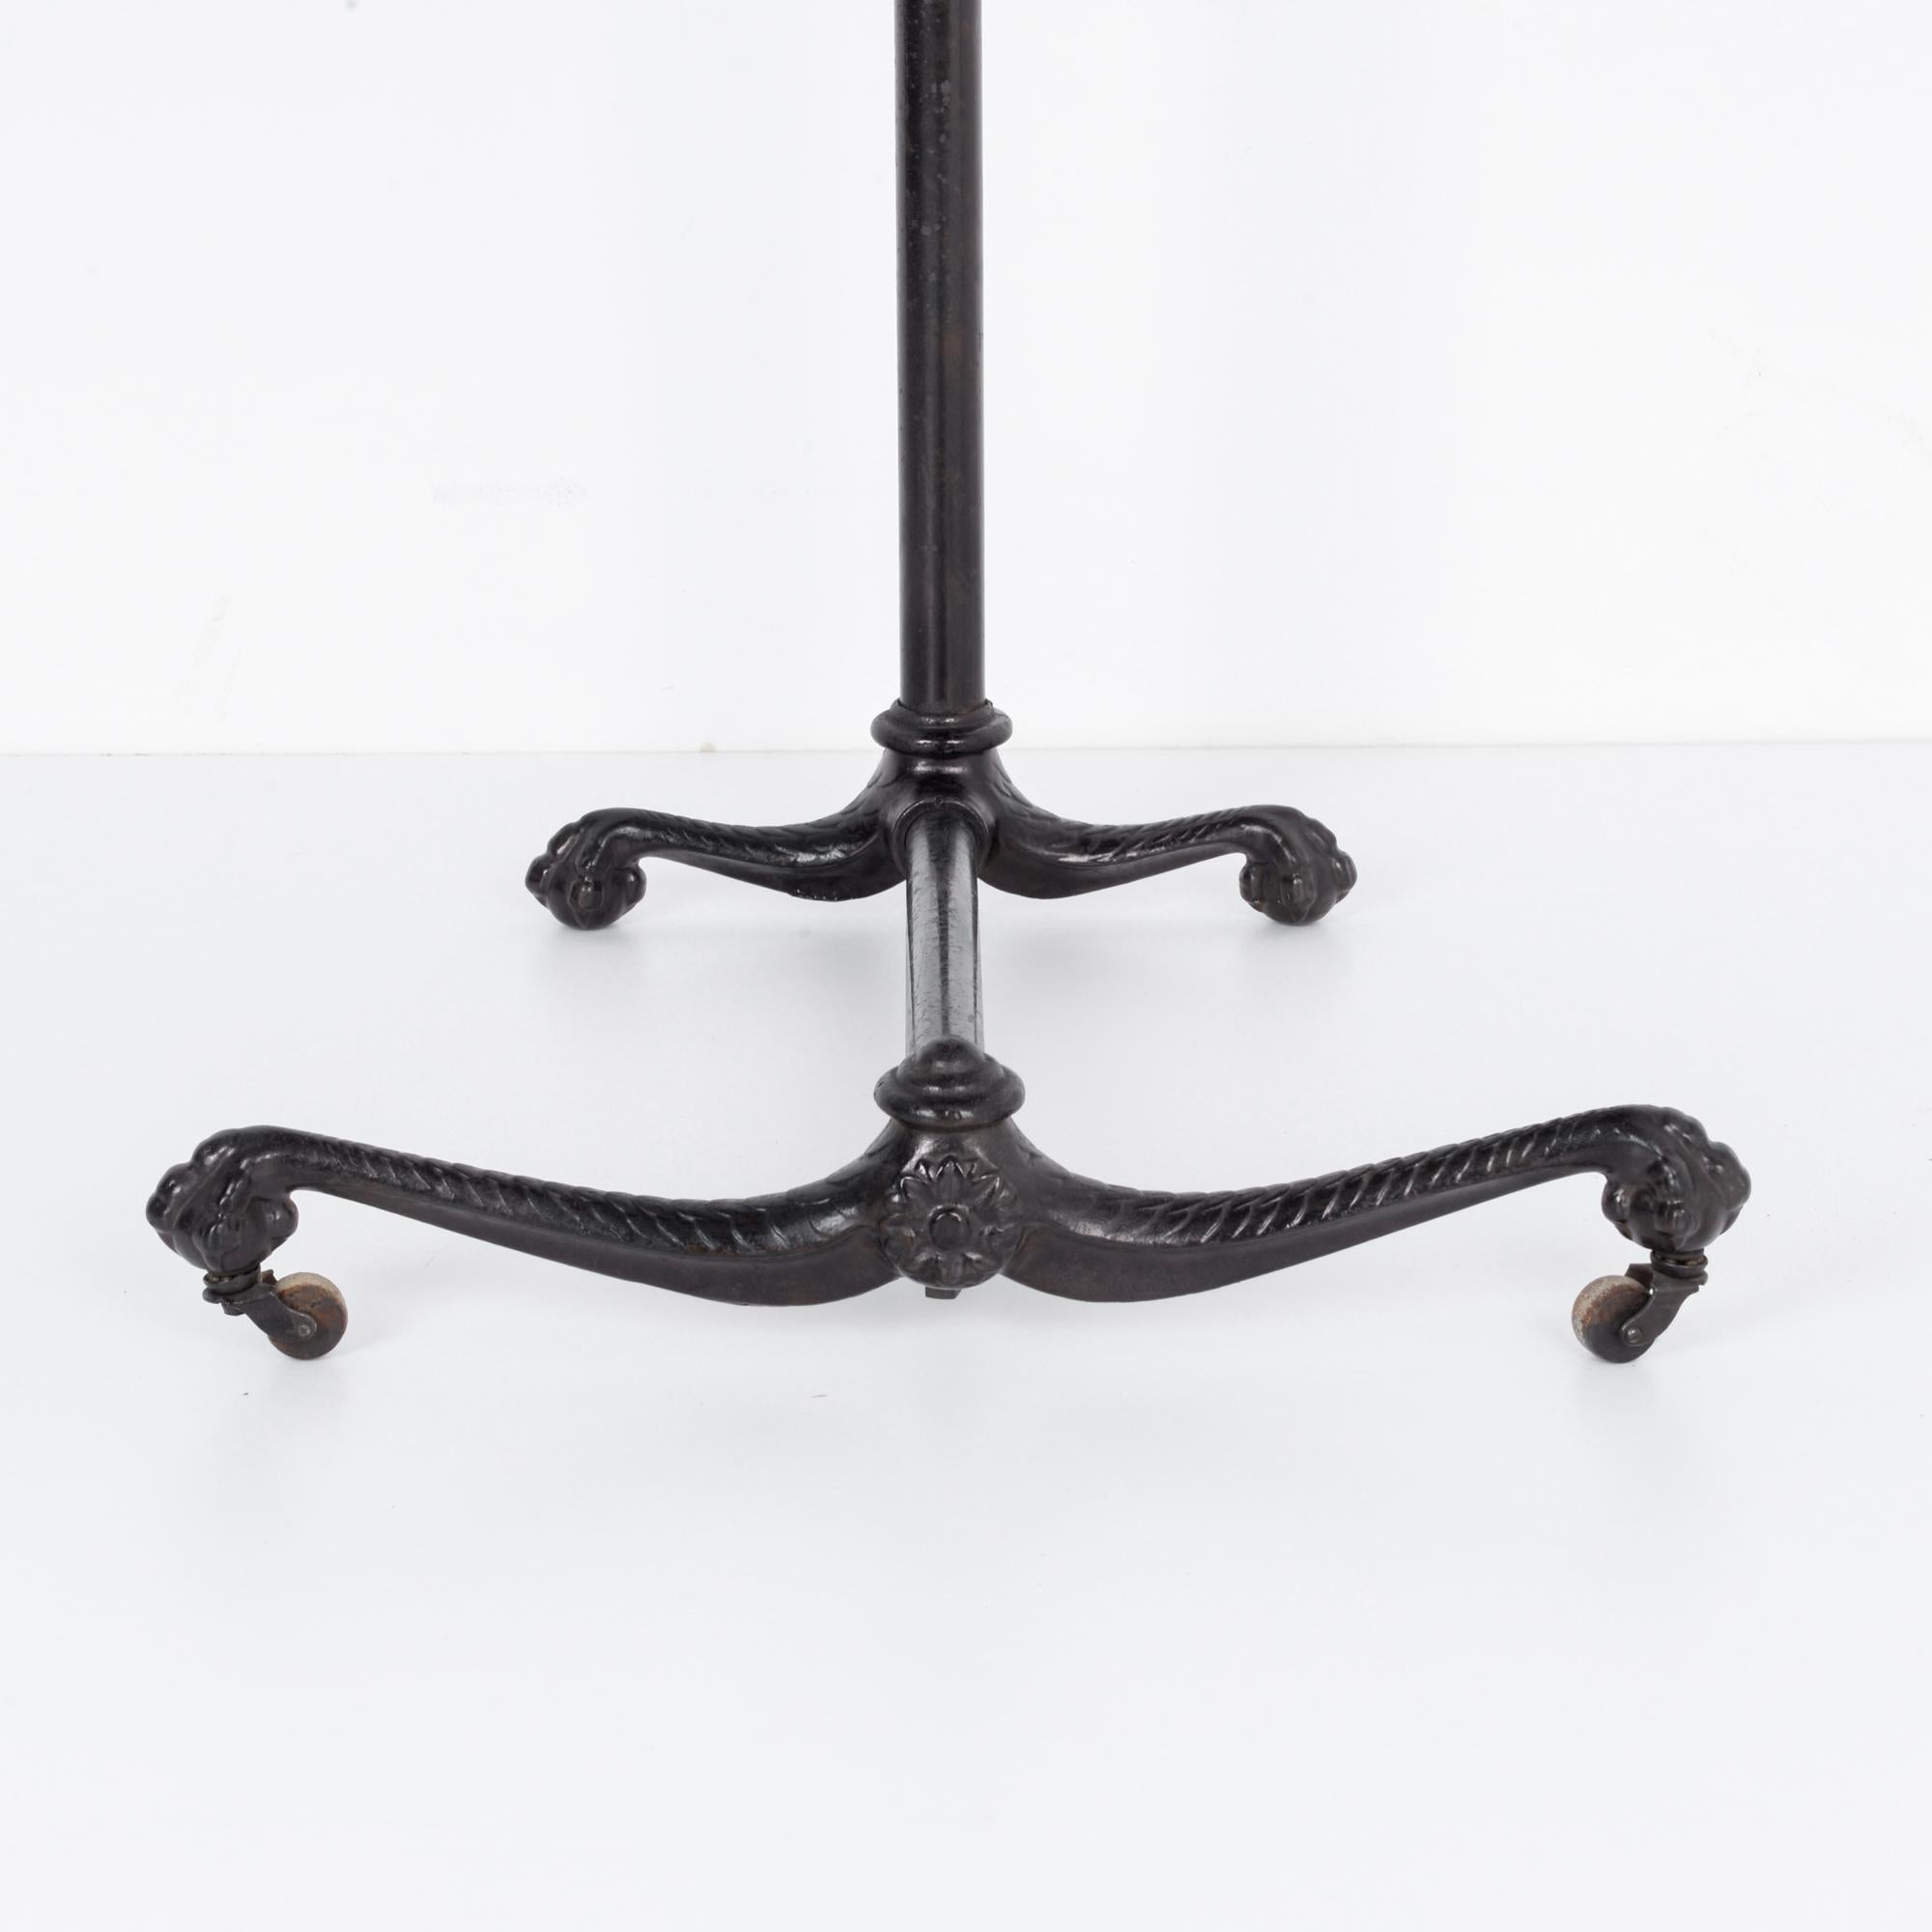 An intriguining small table from France, circa 1910. Standing on four clawed feet resting on balls, rendered in ornamental cast iron with an oak table top. This cozy table is a convenient resting place, height adjustable and comes a set of wheels